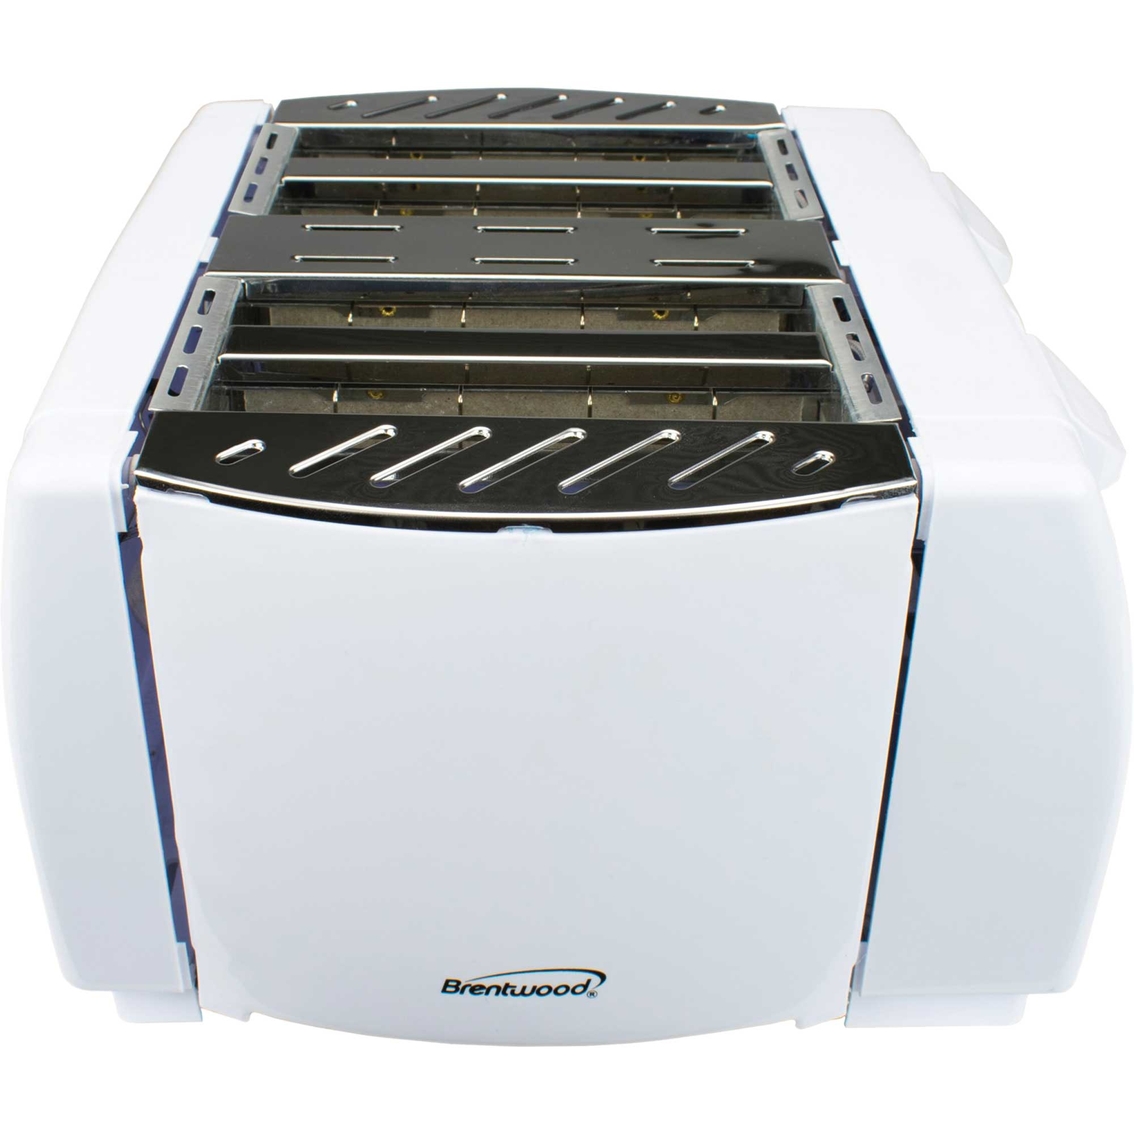 Brentwood Cool Touch 4 Slice Toaster, White - Image 3 of 6